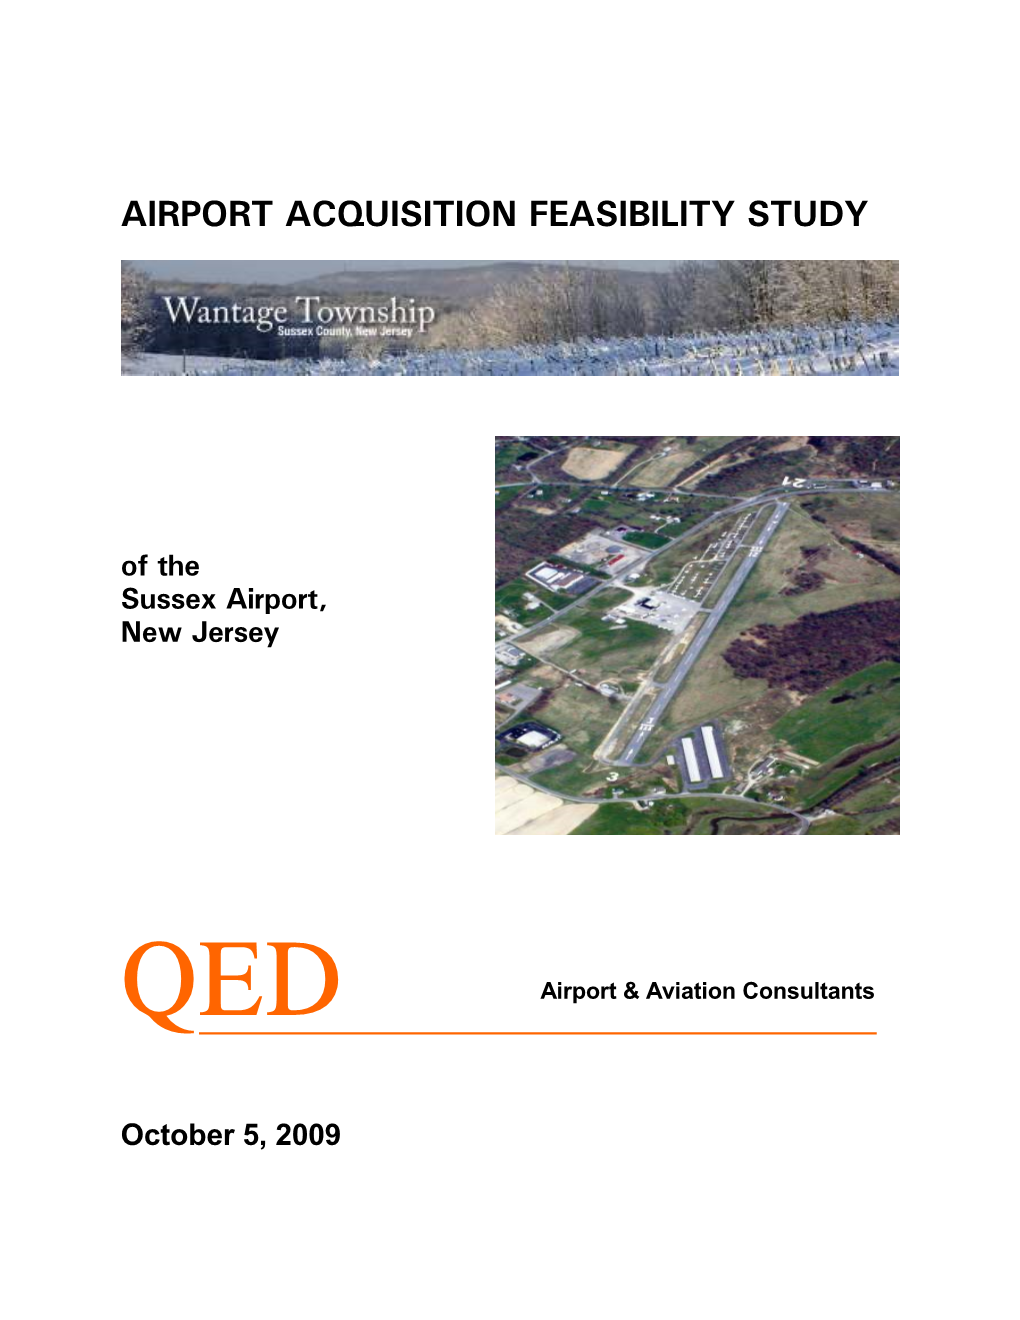 Airport Acquisition Feasibility Study